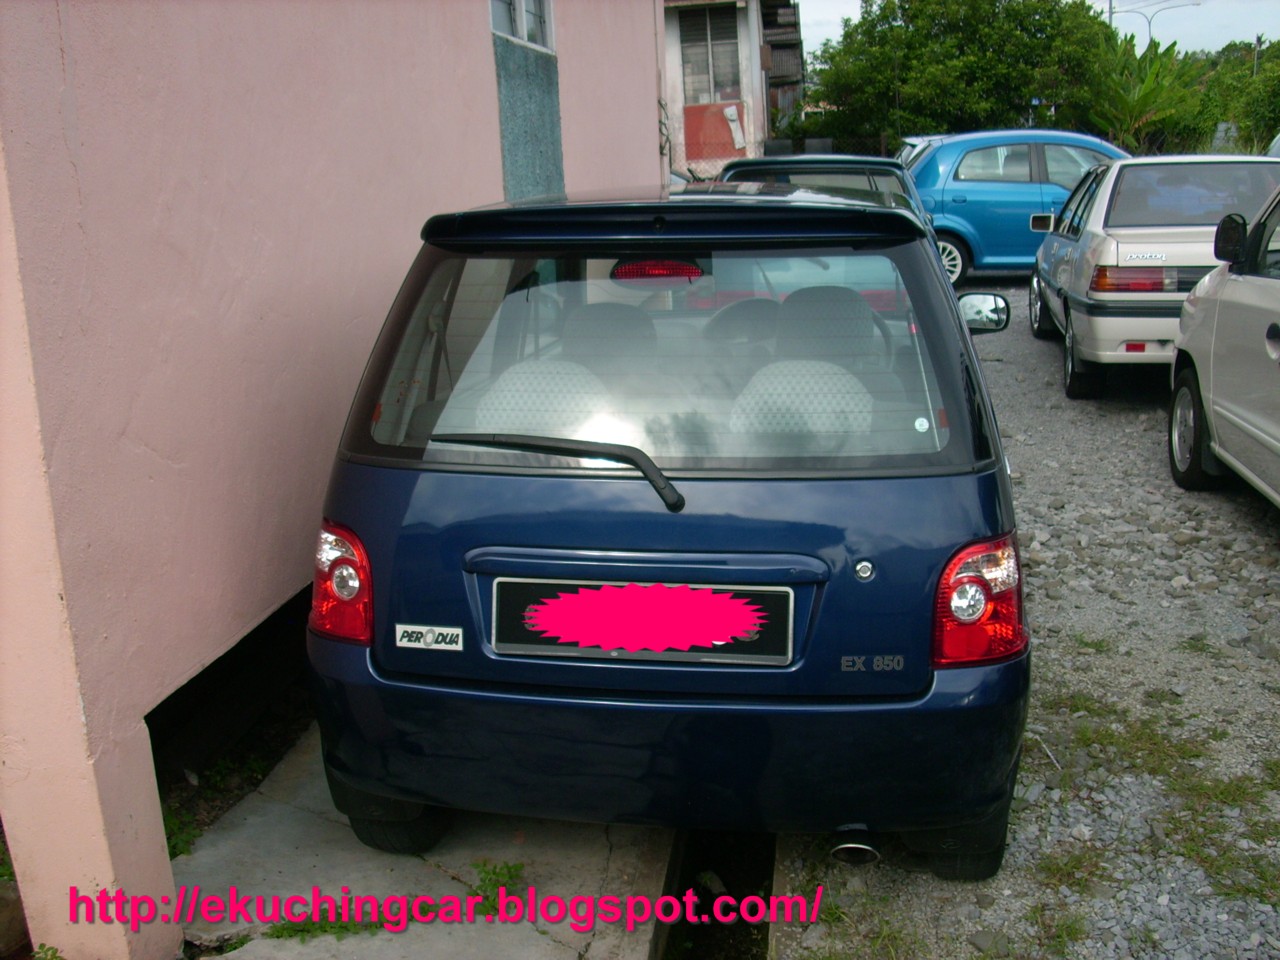 Kuching Use Car For Sale, Buy, Sell: Kancil 850EX